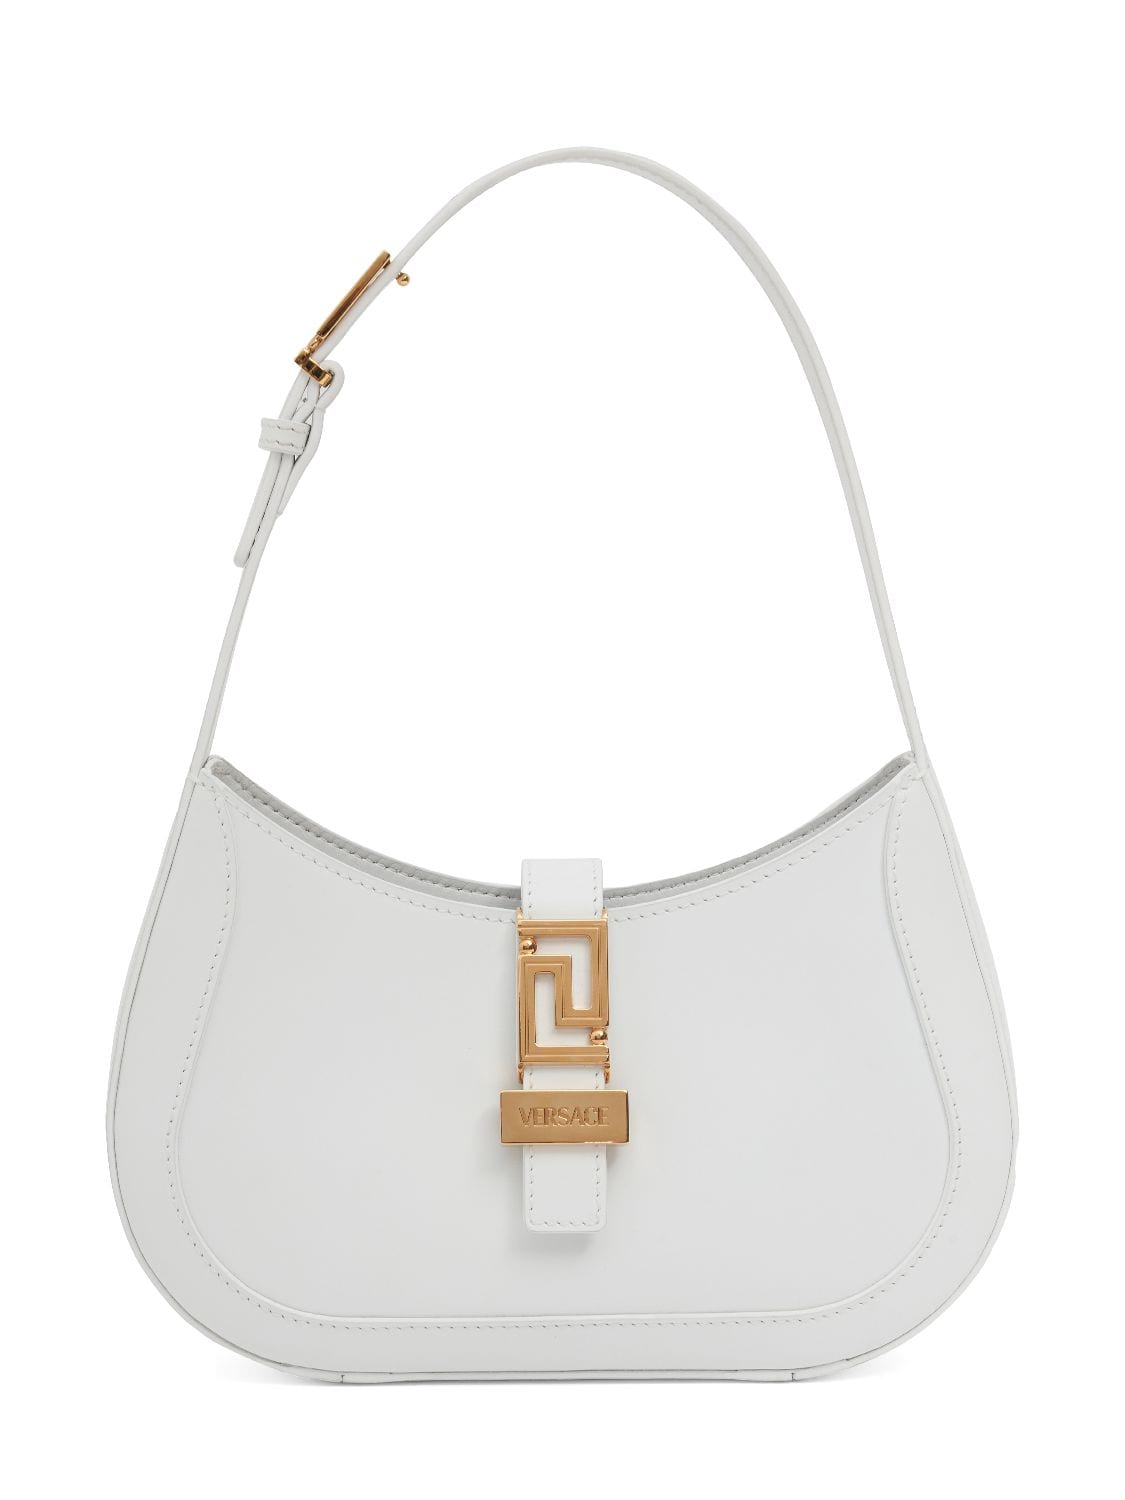 Versace Small Leather Hobo Bag In Optical White